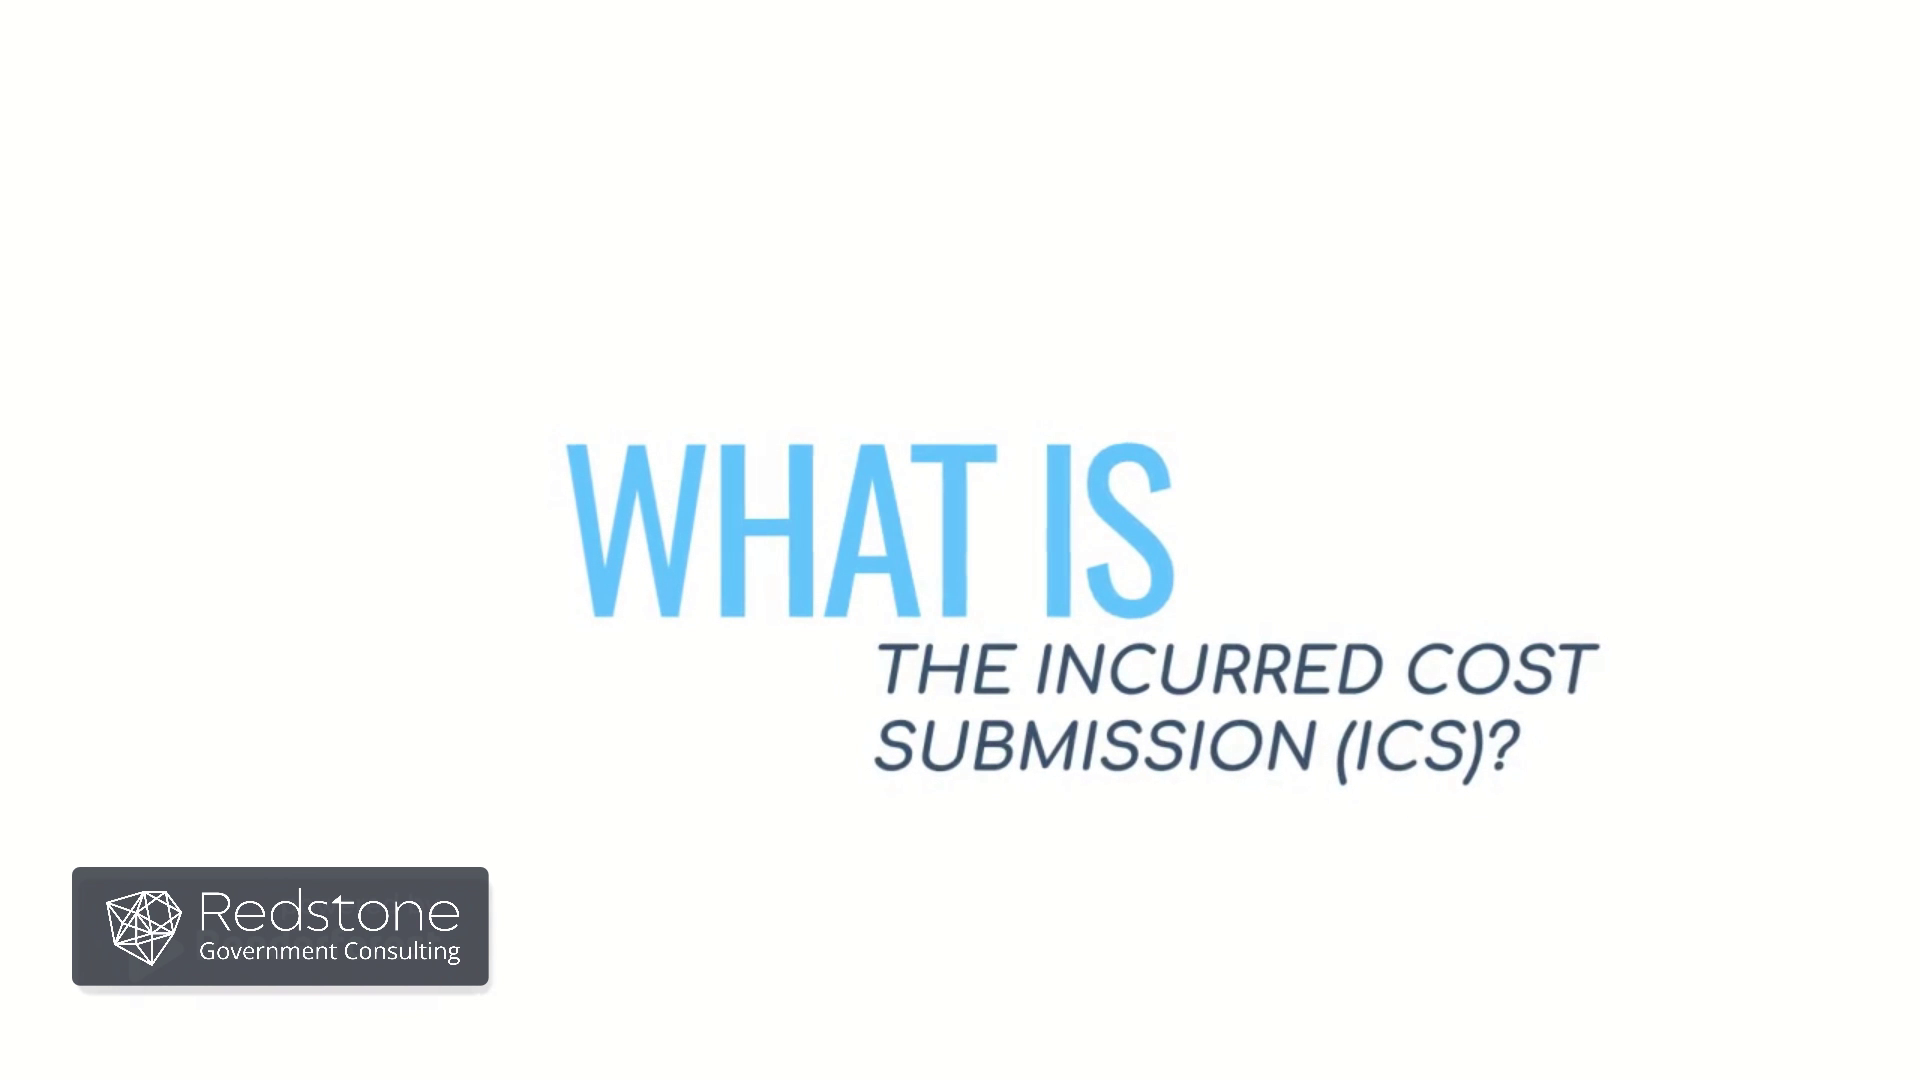 What is Schedule I in the Incurred Cost Submission? - Redstone gci